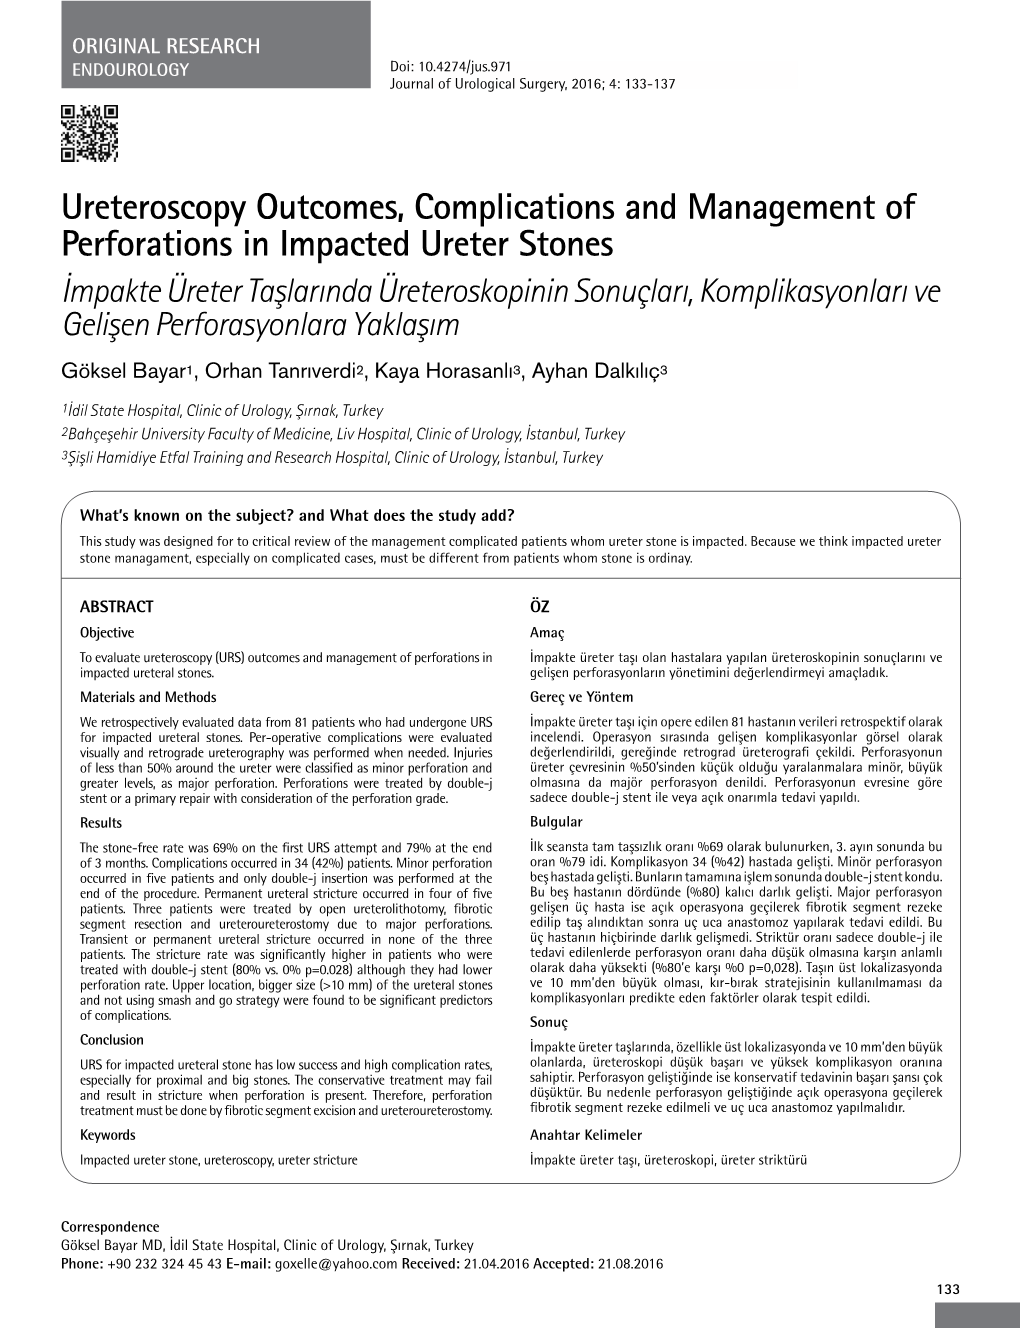 Ureteroscopy Outcomes, Complications and Management Of